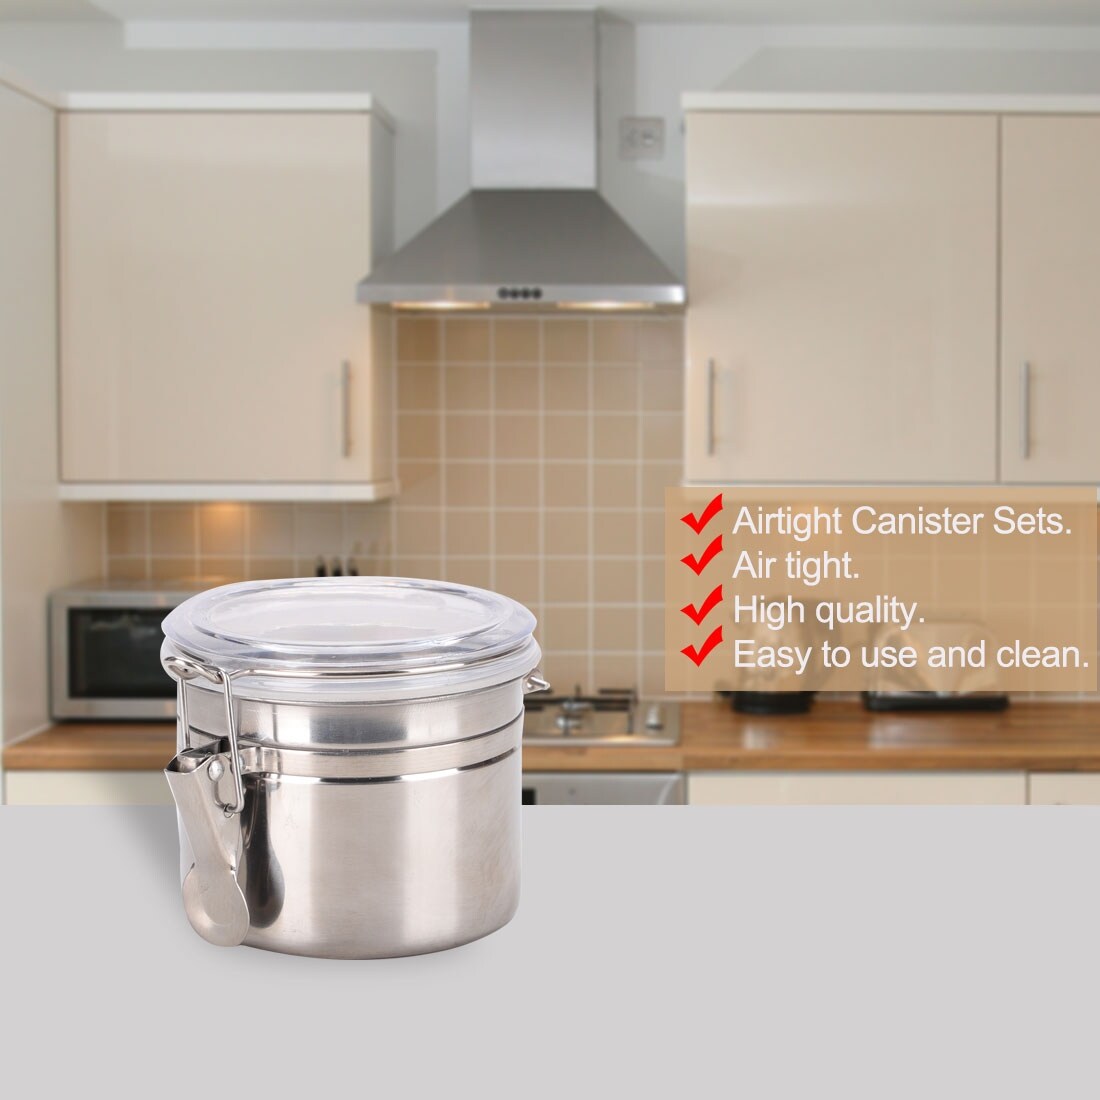 My Favorite Airtight Stainless Steel Kitchen Container » My